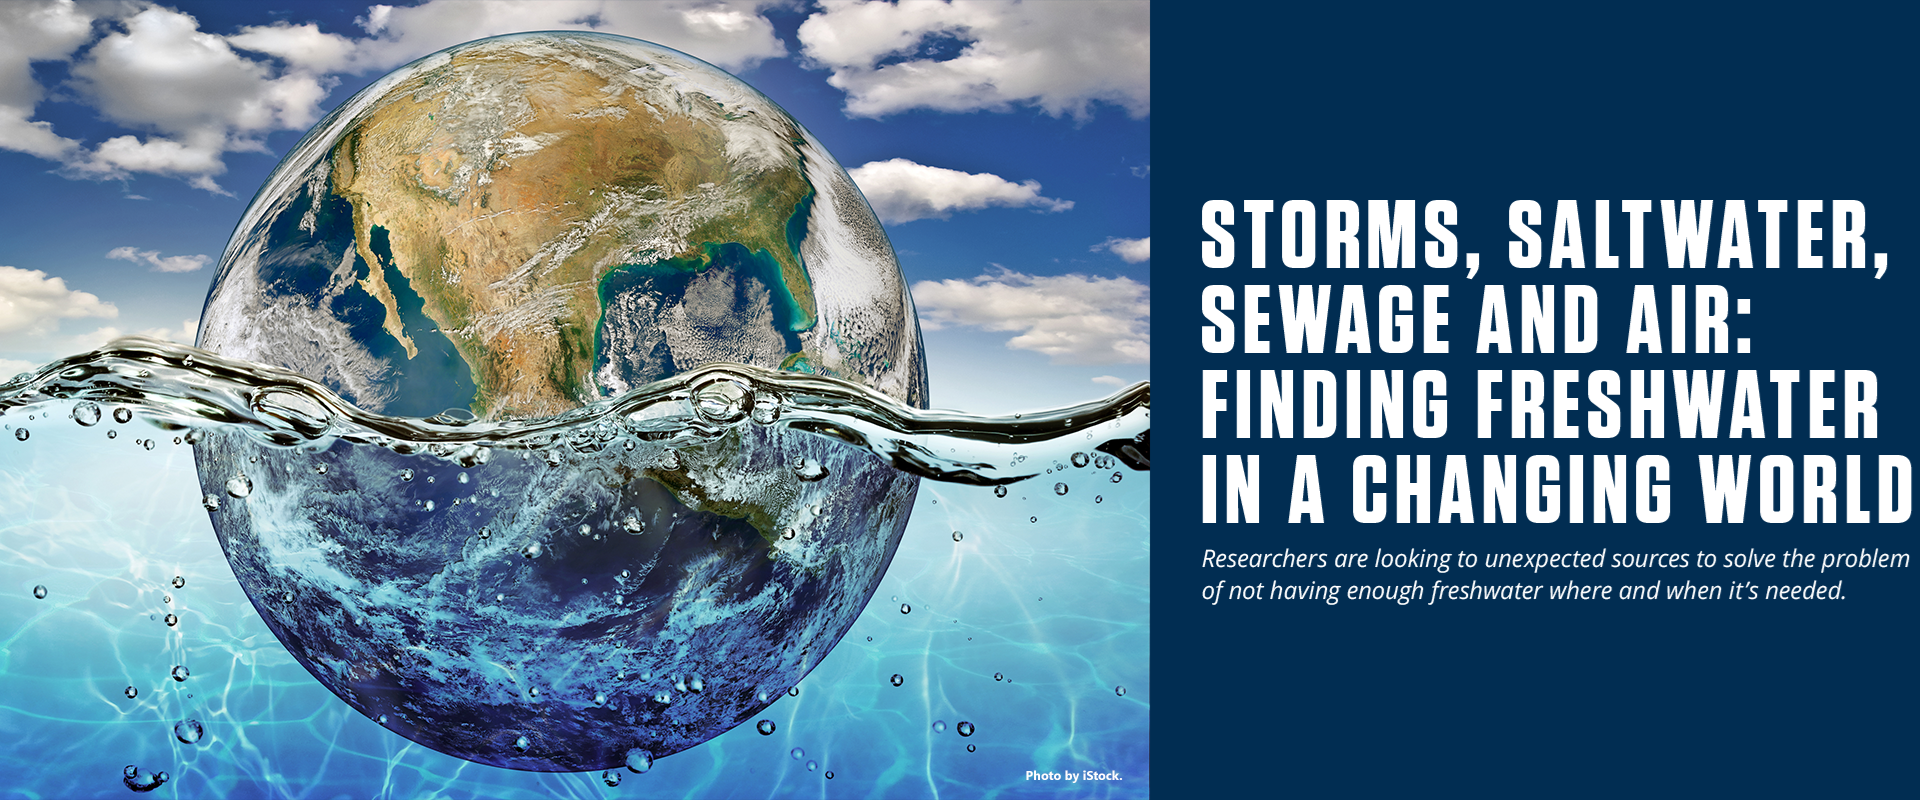 Storms, Saltwater, Sewage and Air: Finding Freshwater in a Changing World